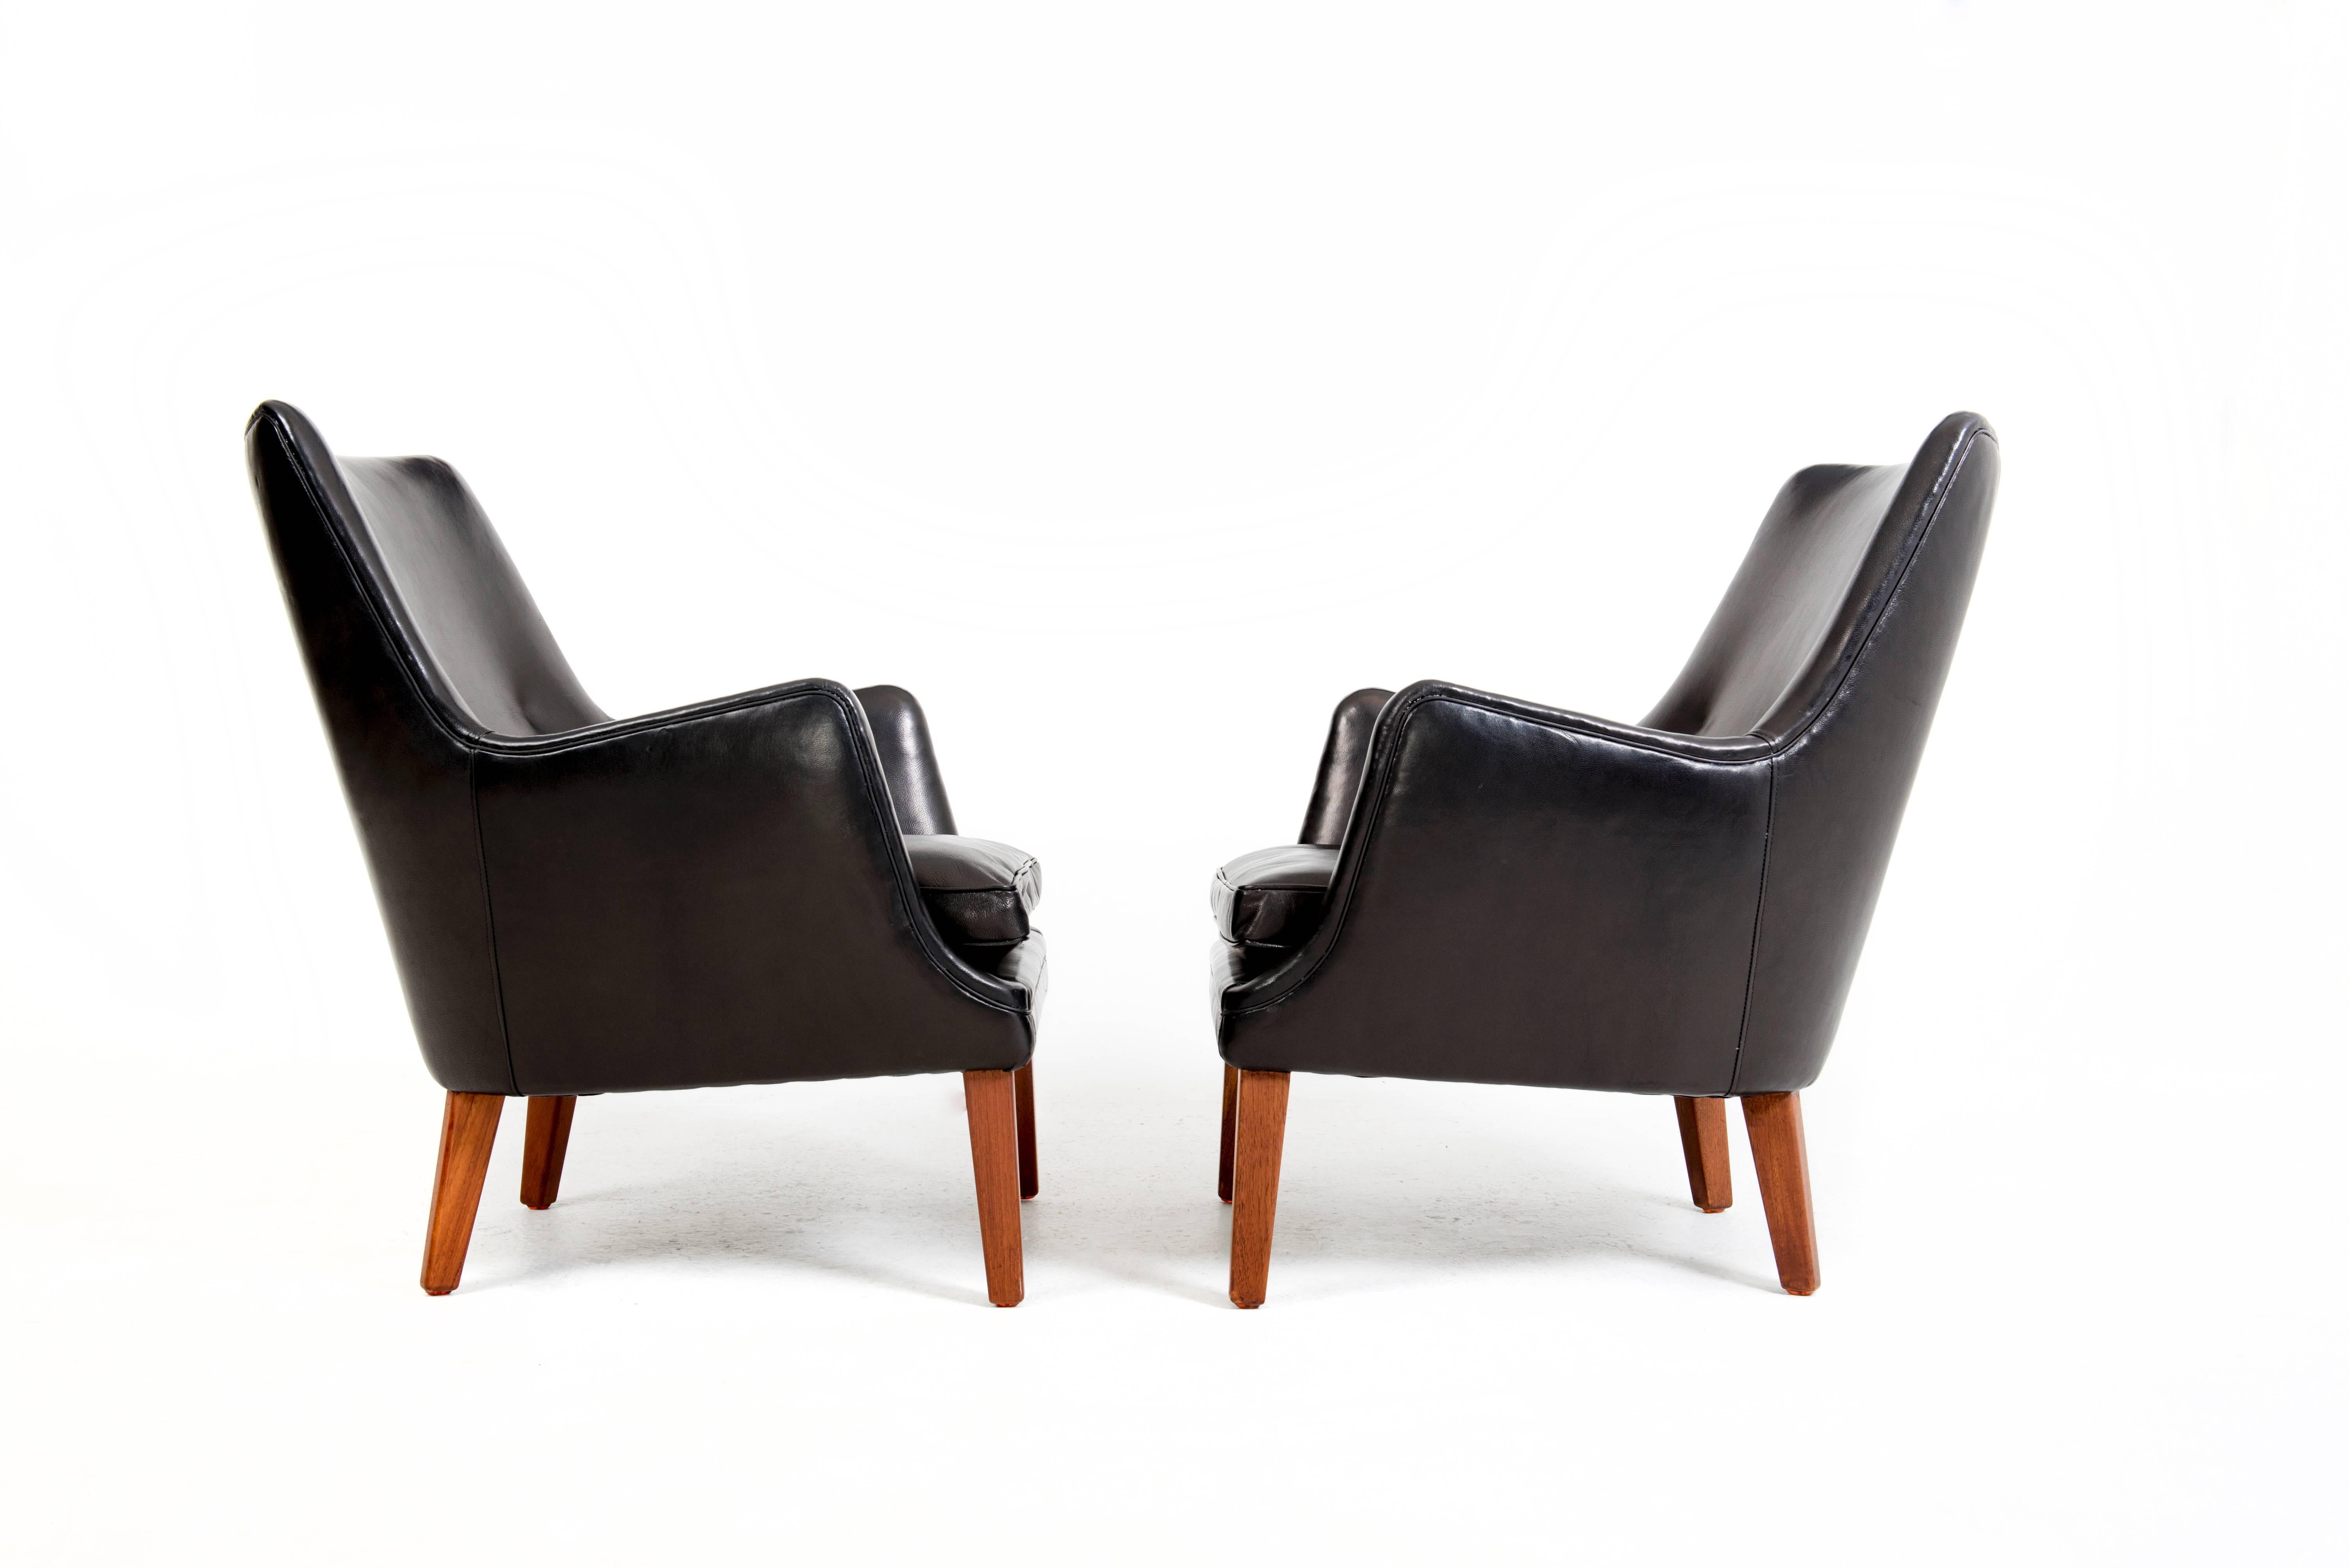 Arne Vodder.

Easy chairs with teak legs. Sides back and loose seat cushion upholstered with black Niger leather. 

Designed in 1953.
Made by upholsterer Ivan Schlechter.